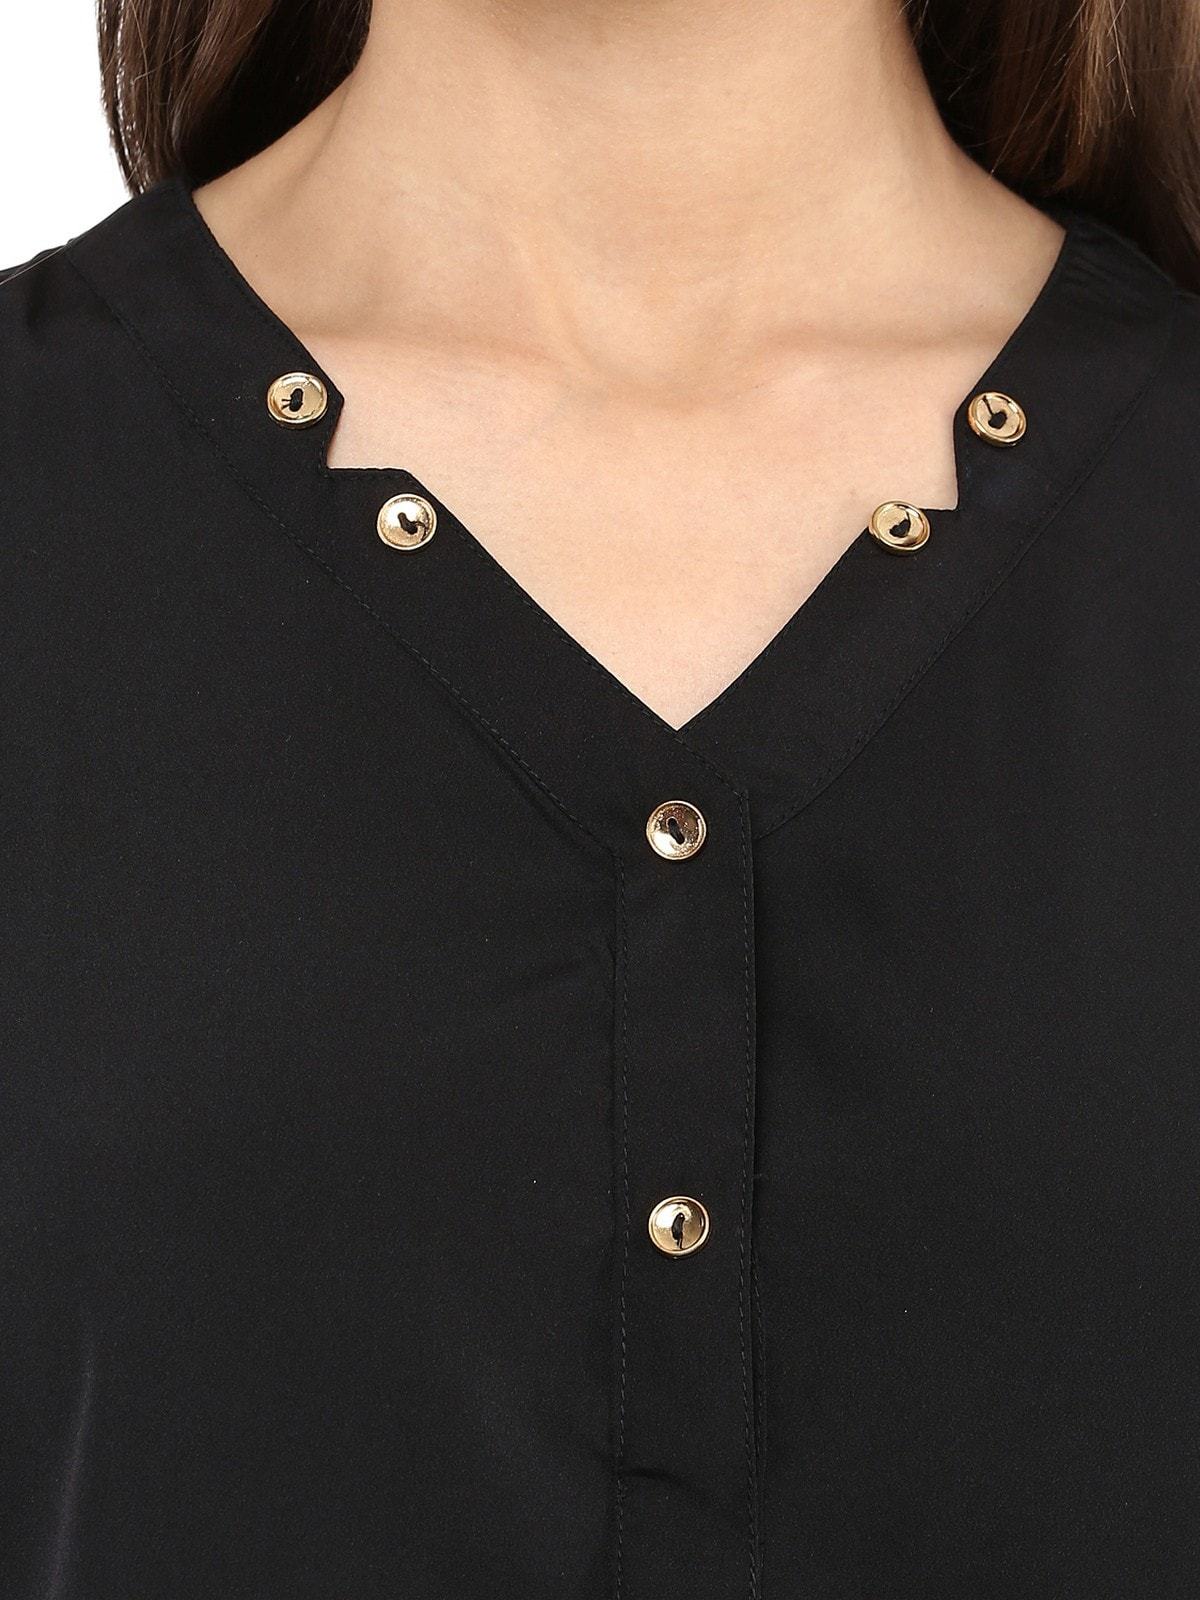 Women's Black  Shirt Top With Detailed Notch Designs - Pannkh